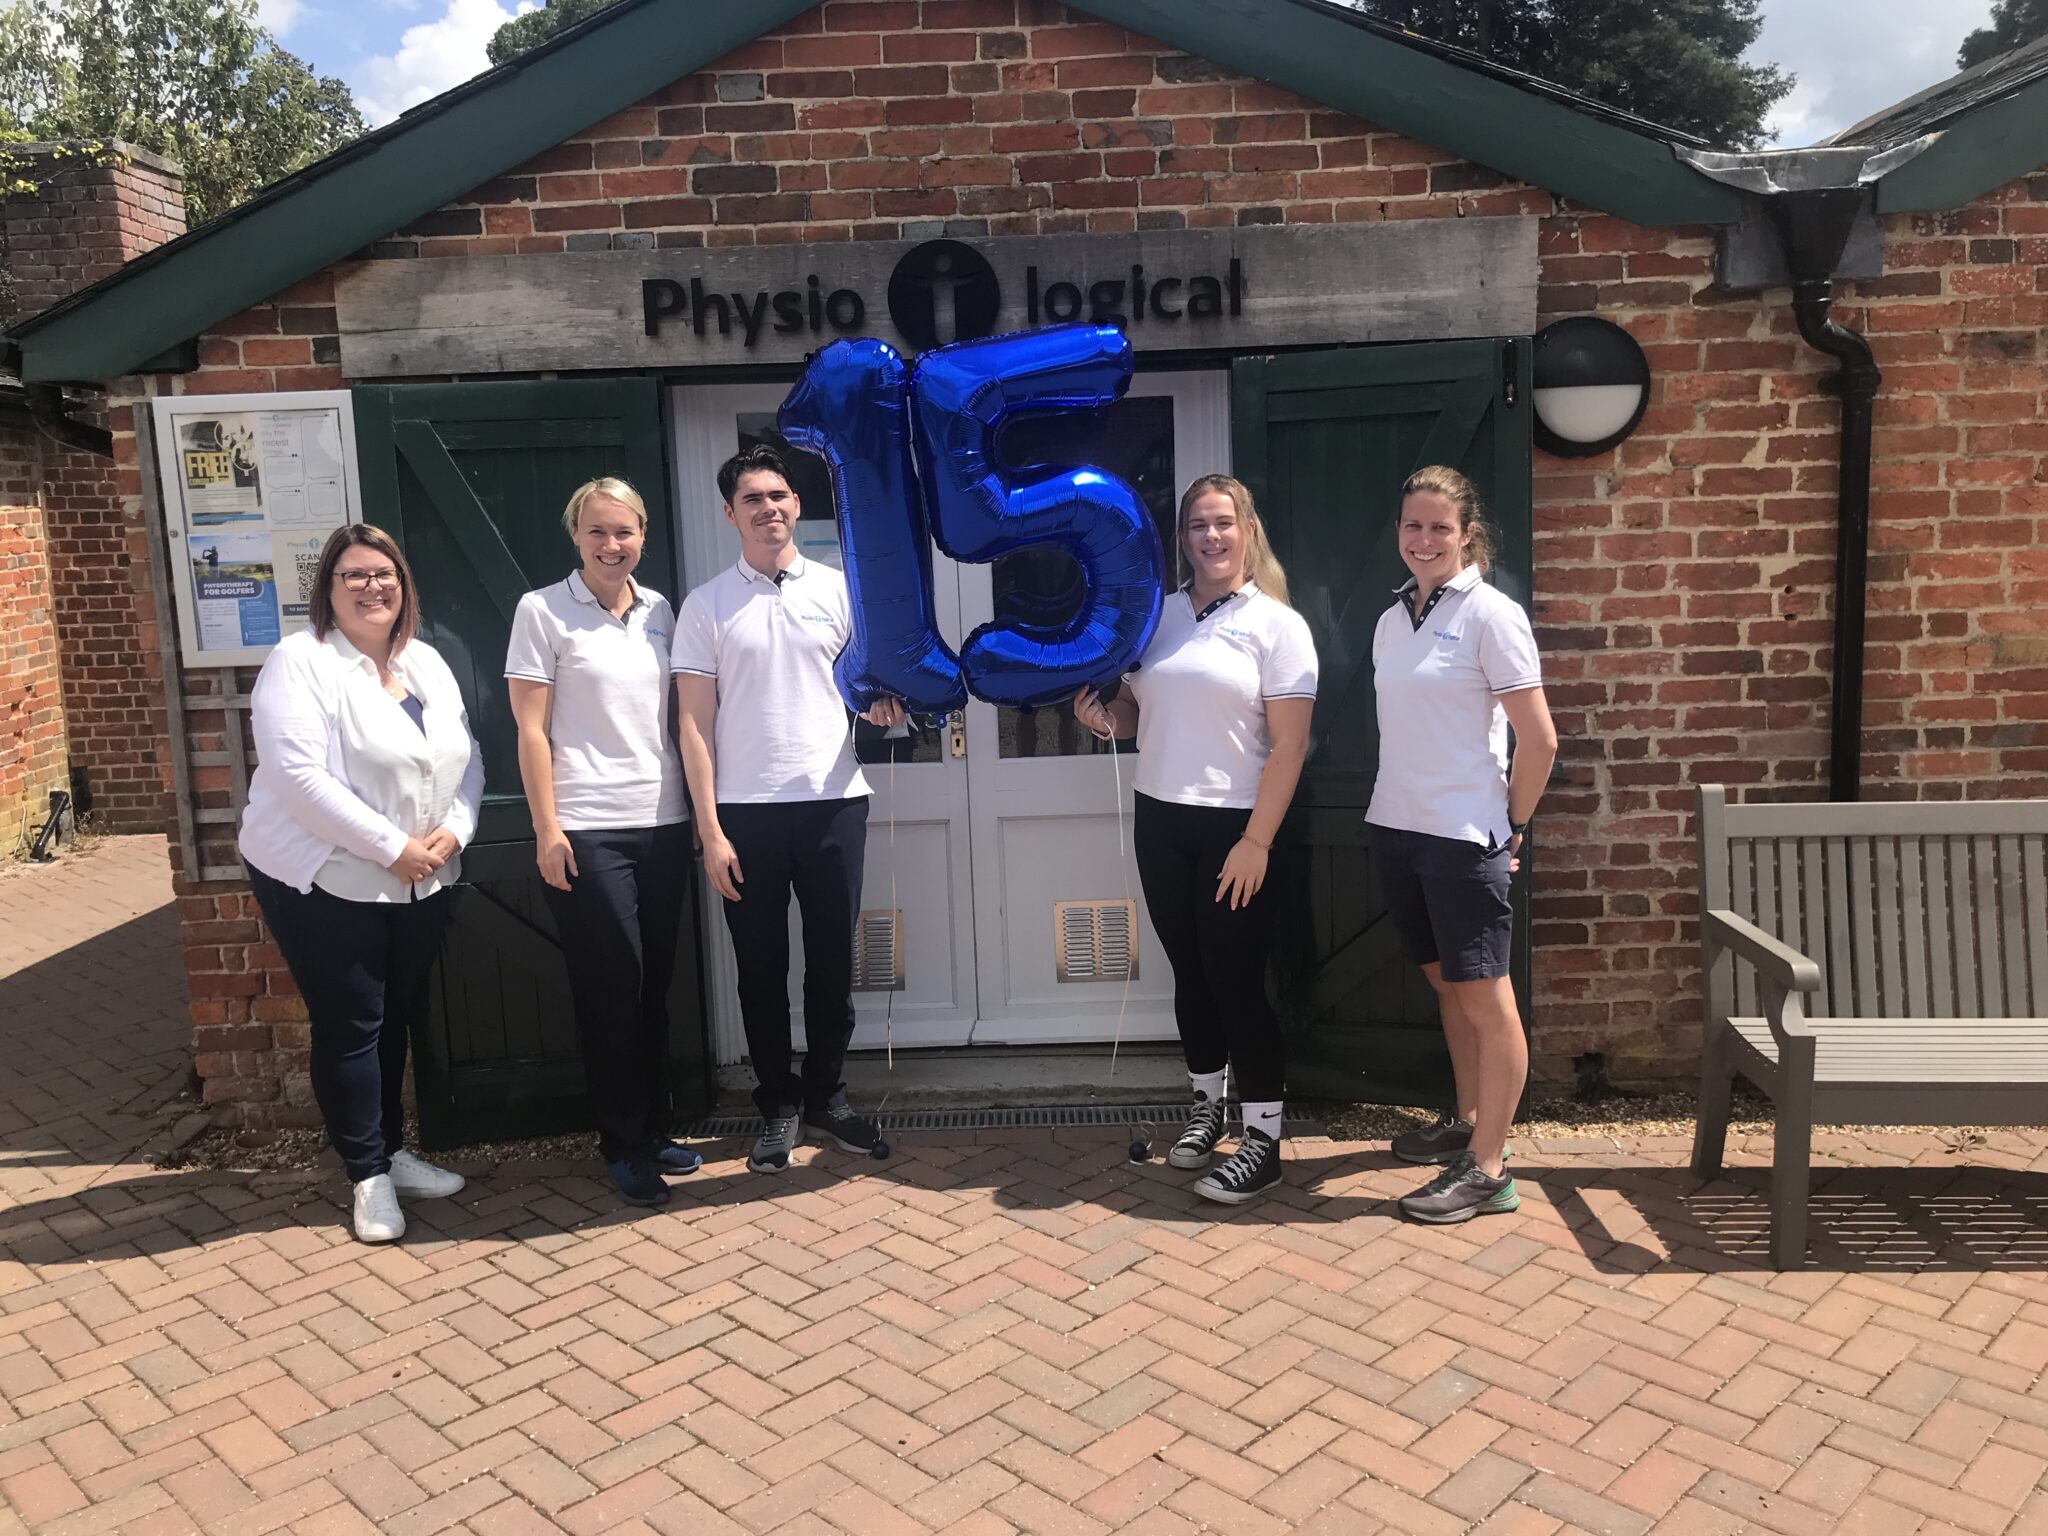 Physio-logical Team 15th Birthday photo with 15th birthday balloon outside Physio-logical clinic on stansted park estate